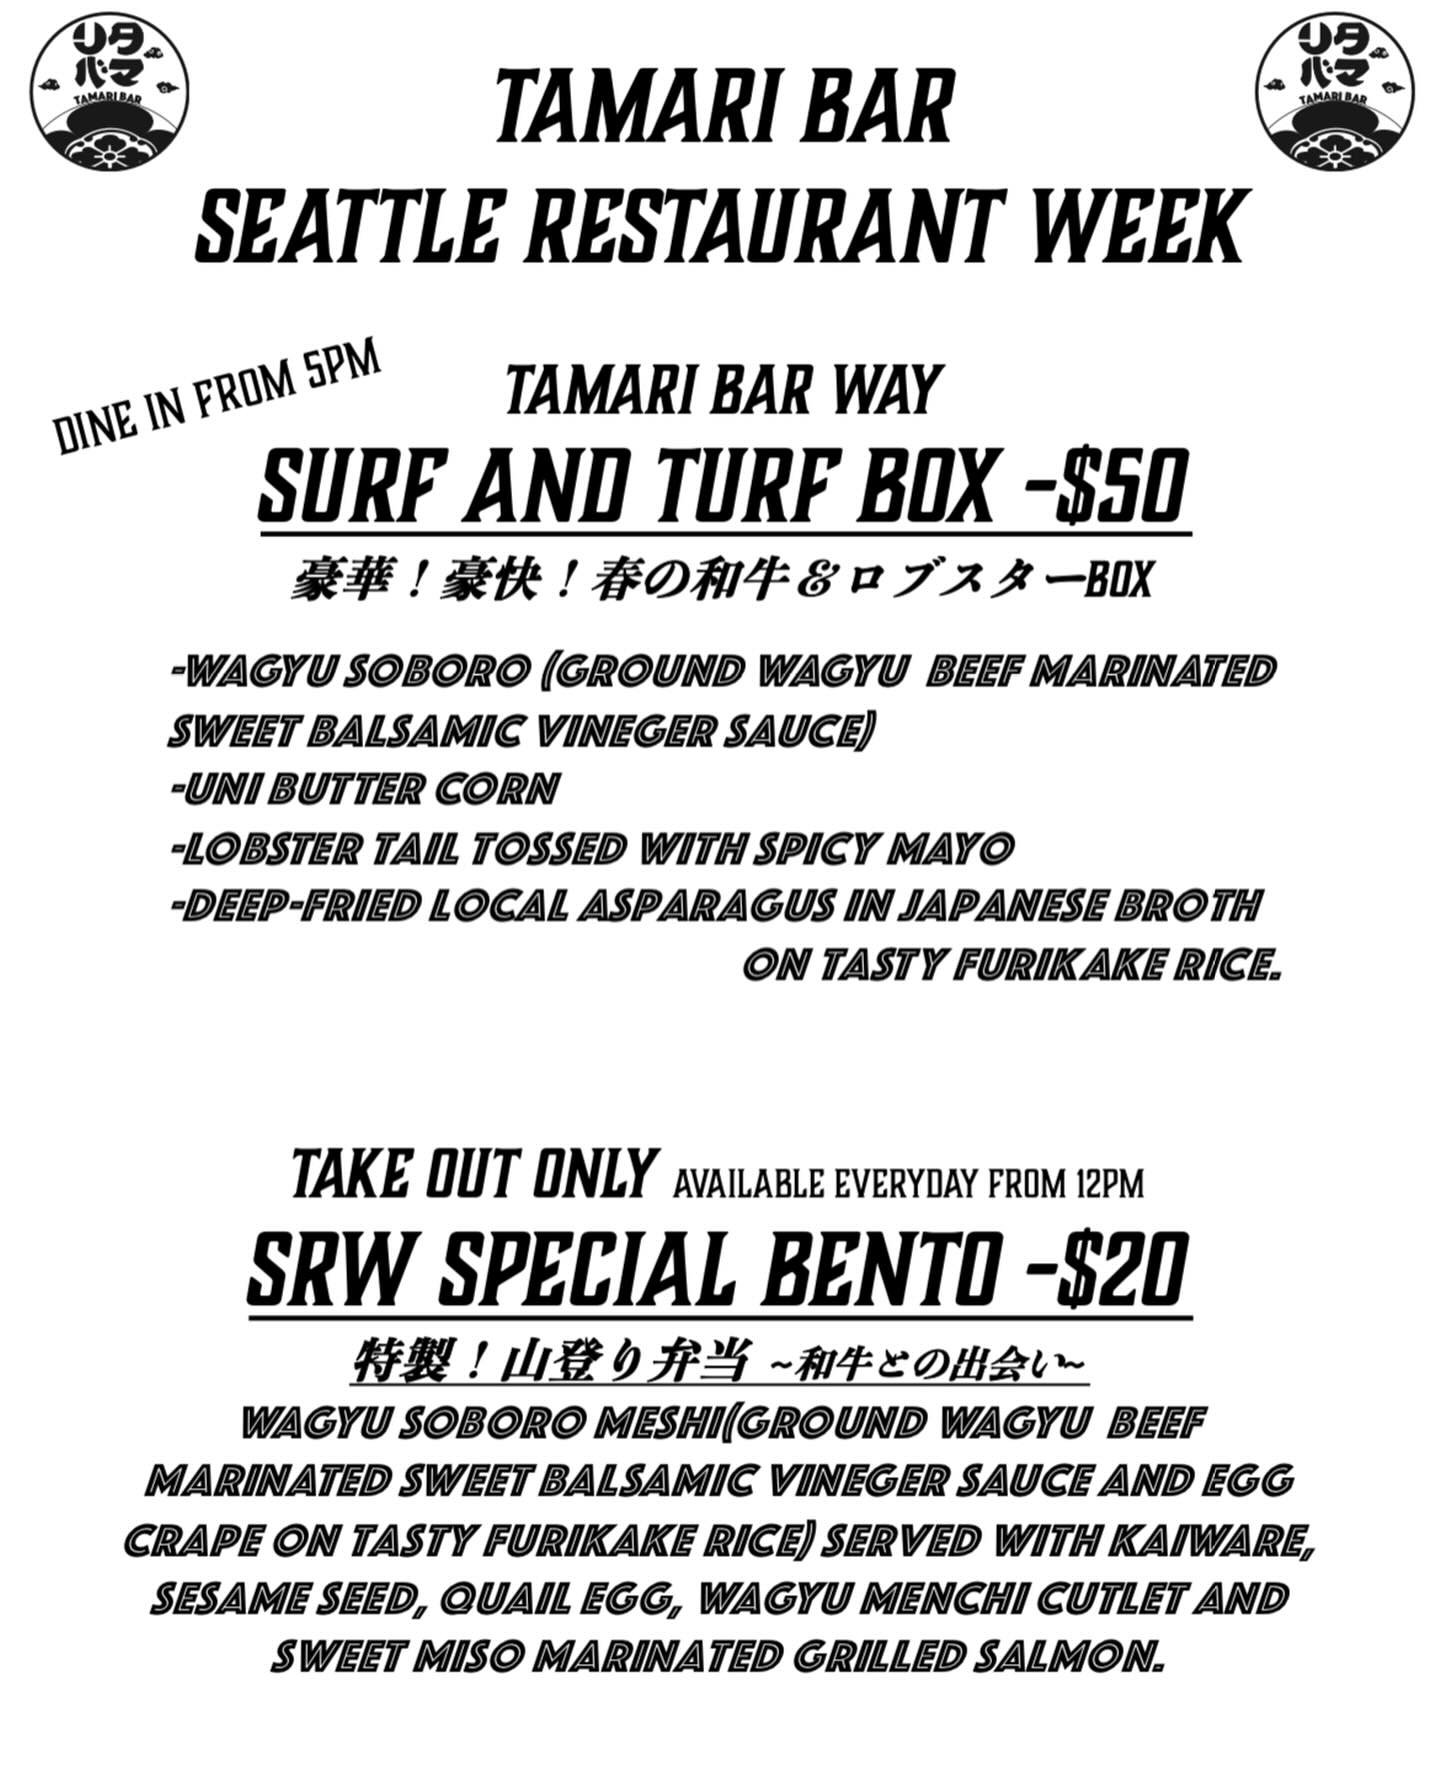 We're so excited to join this spring's Seattle Restaurant Week again happening this Sunday to April 27th, Saturday.
This time, Tamari Bar offers the dinner menu for $50 including the giant lobster mayo, Local asparagus and more. Also we are still off